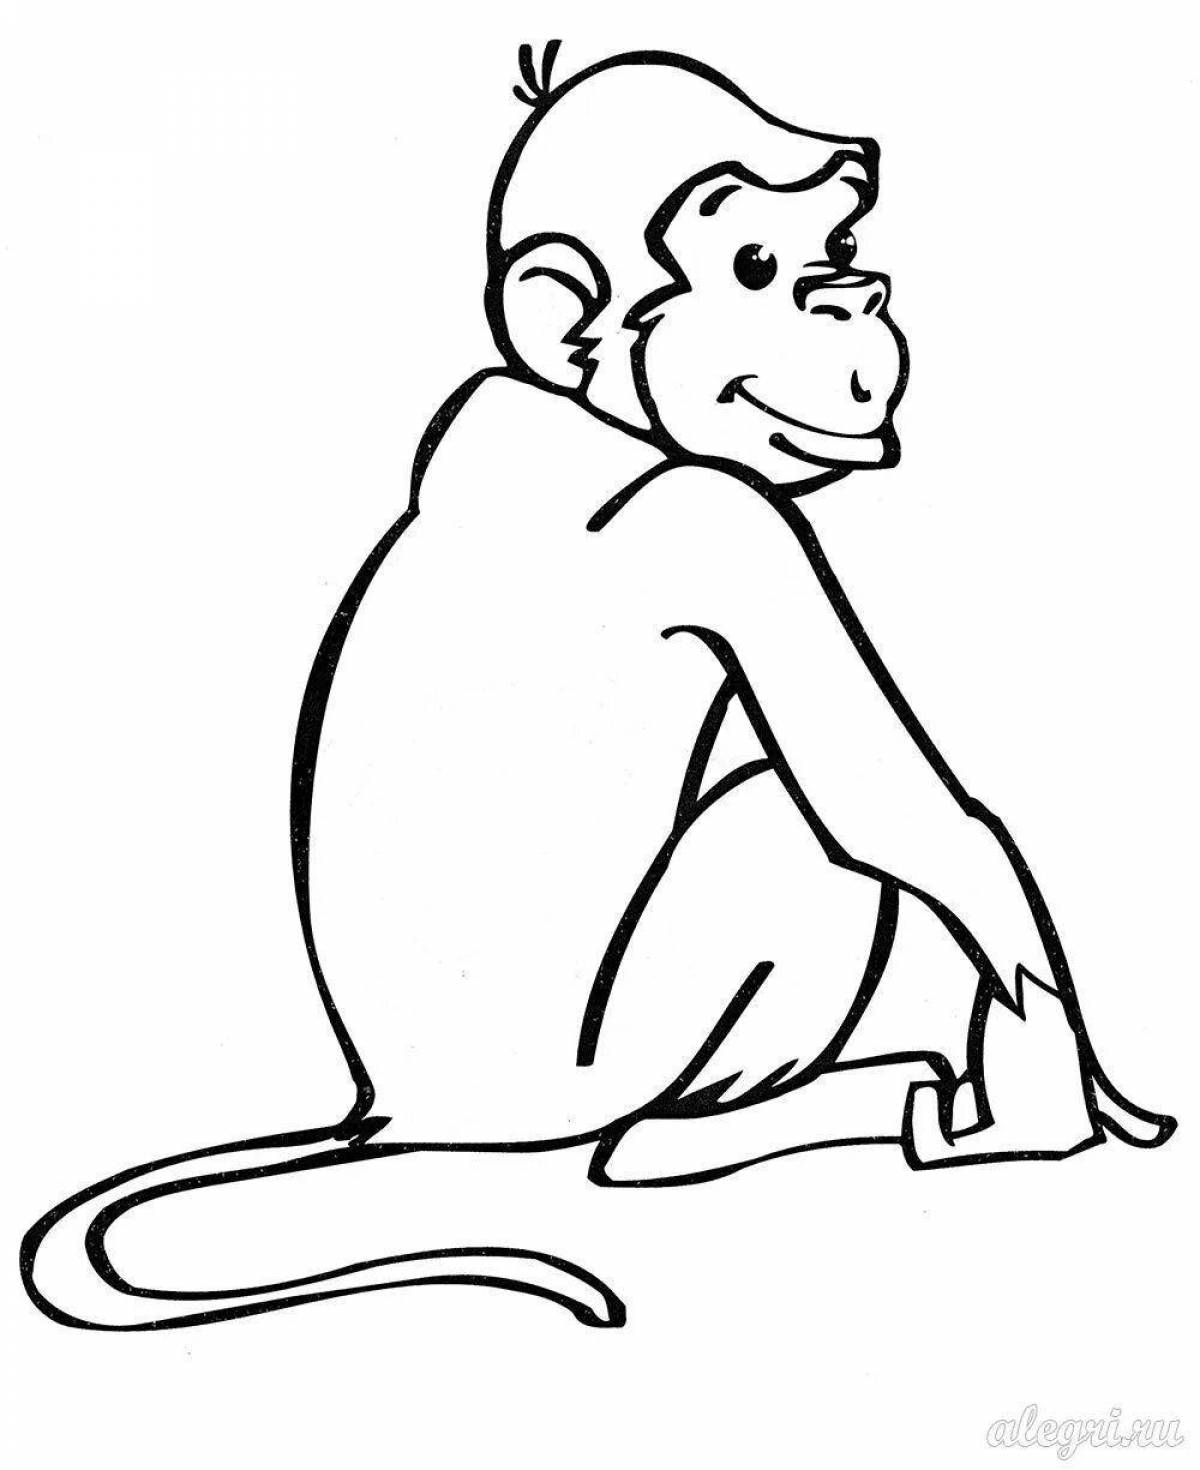 Colorful monkey coloring book